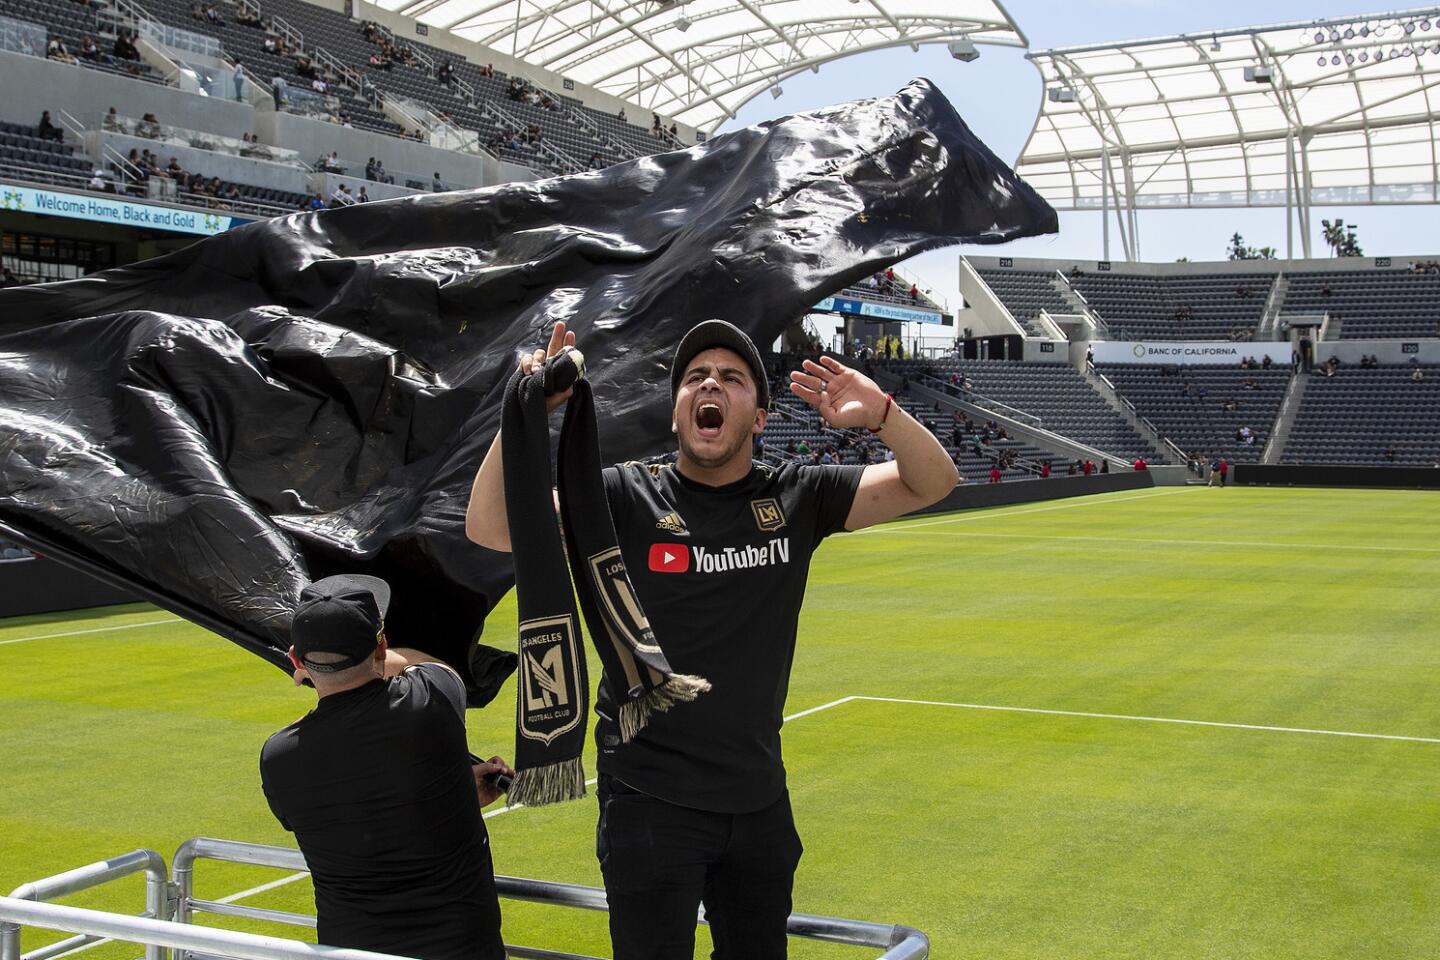 David Cordero of Victorville leads a rally group called the Empire Boys while watching an LAFC soccer game on giant video screens inside the new Banc of California Stadium on April 21.